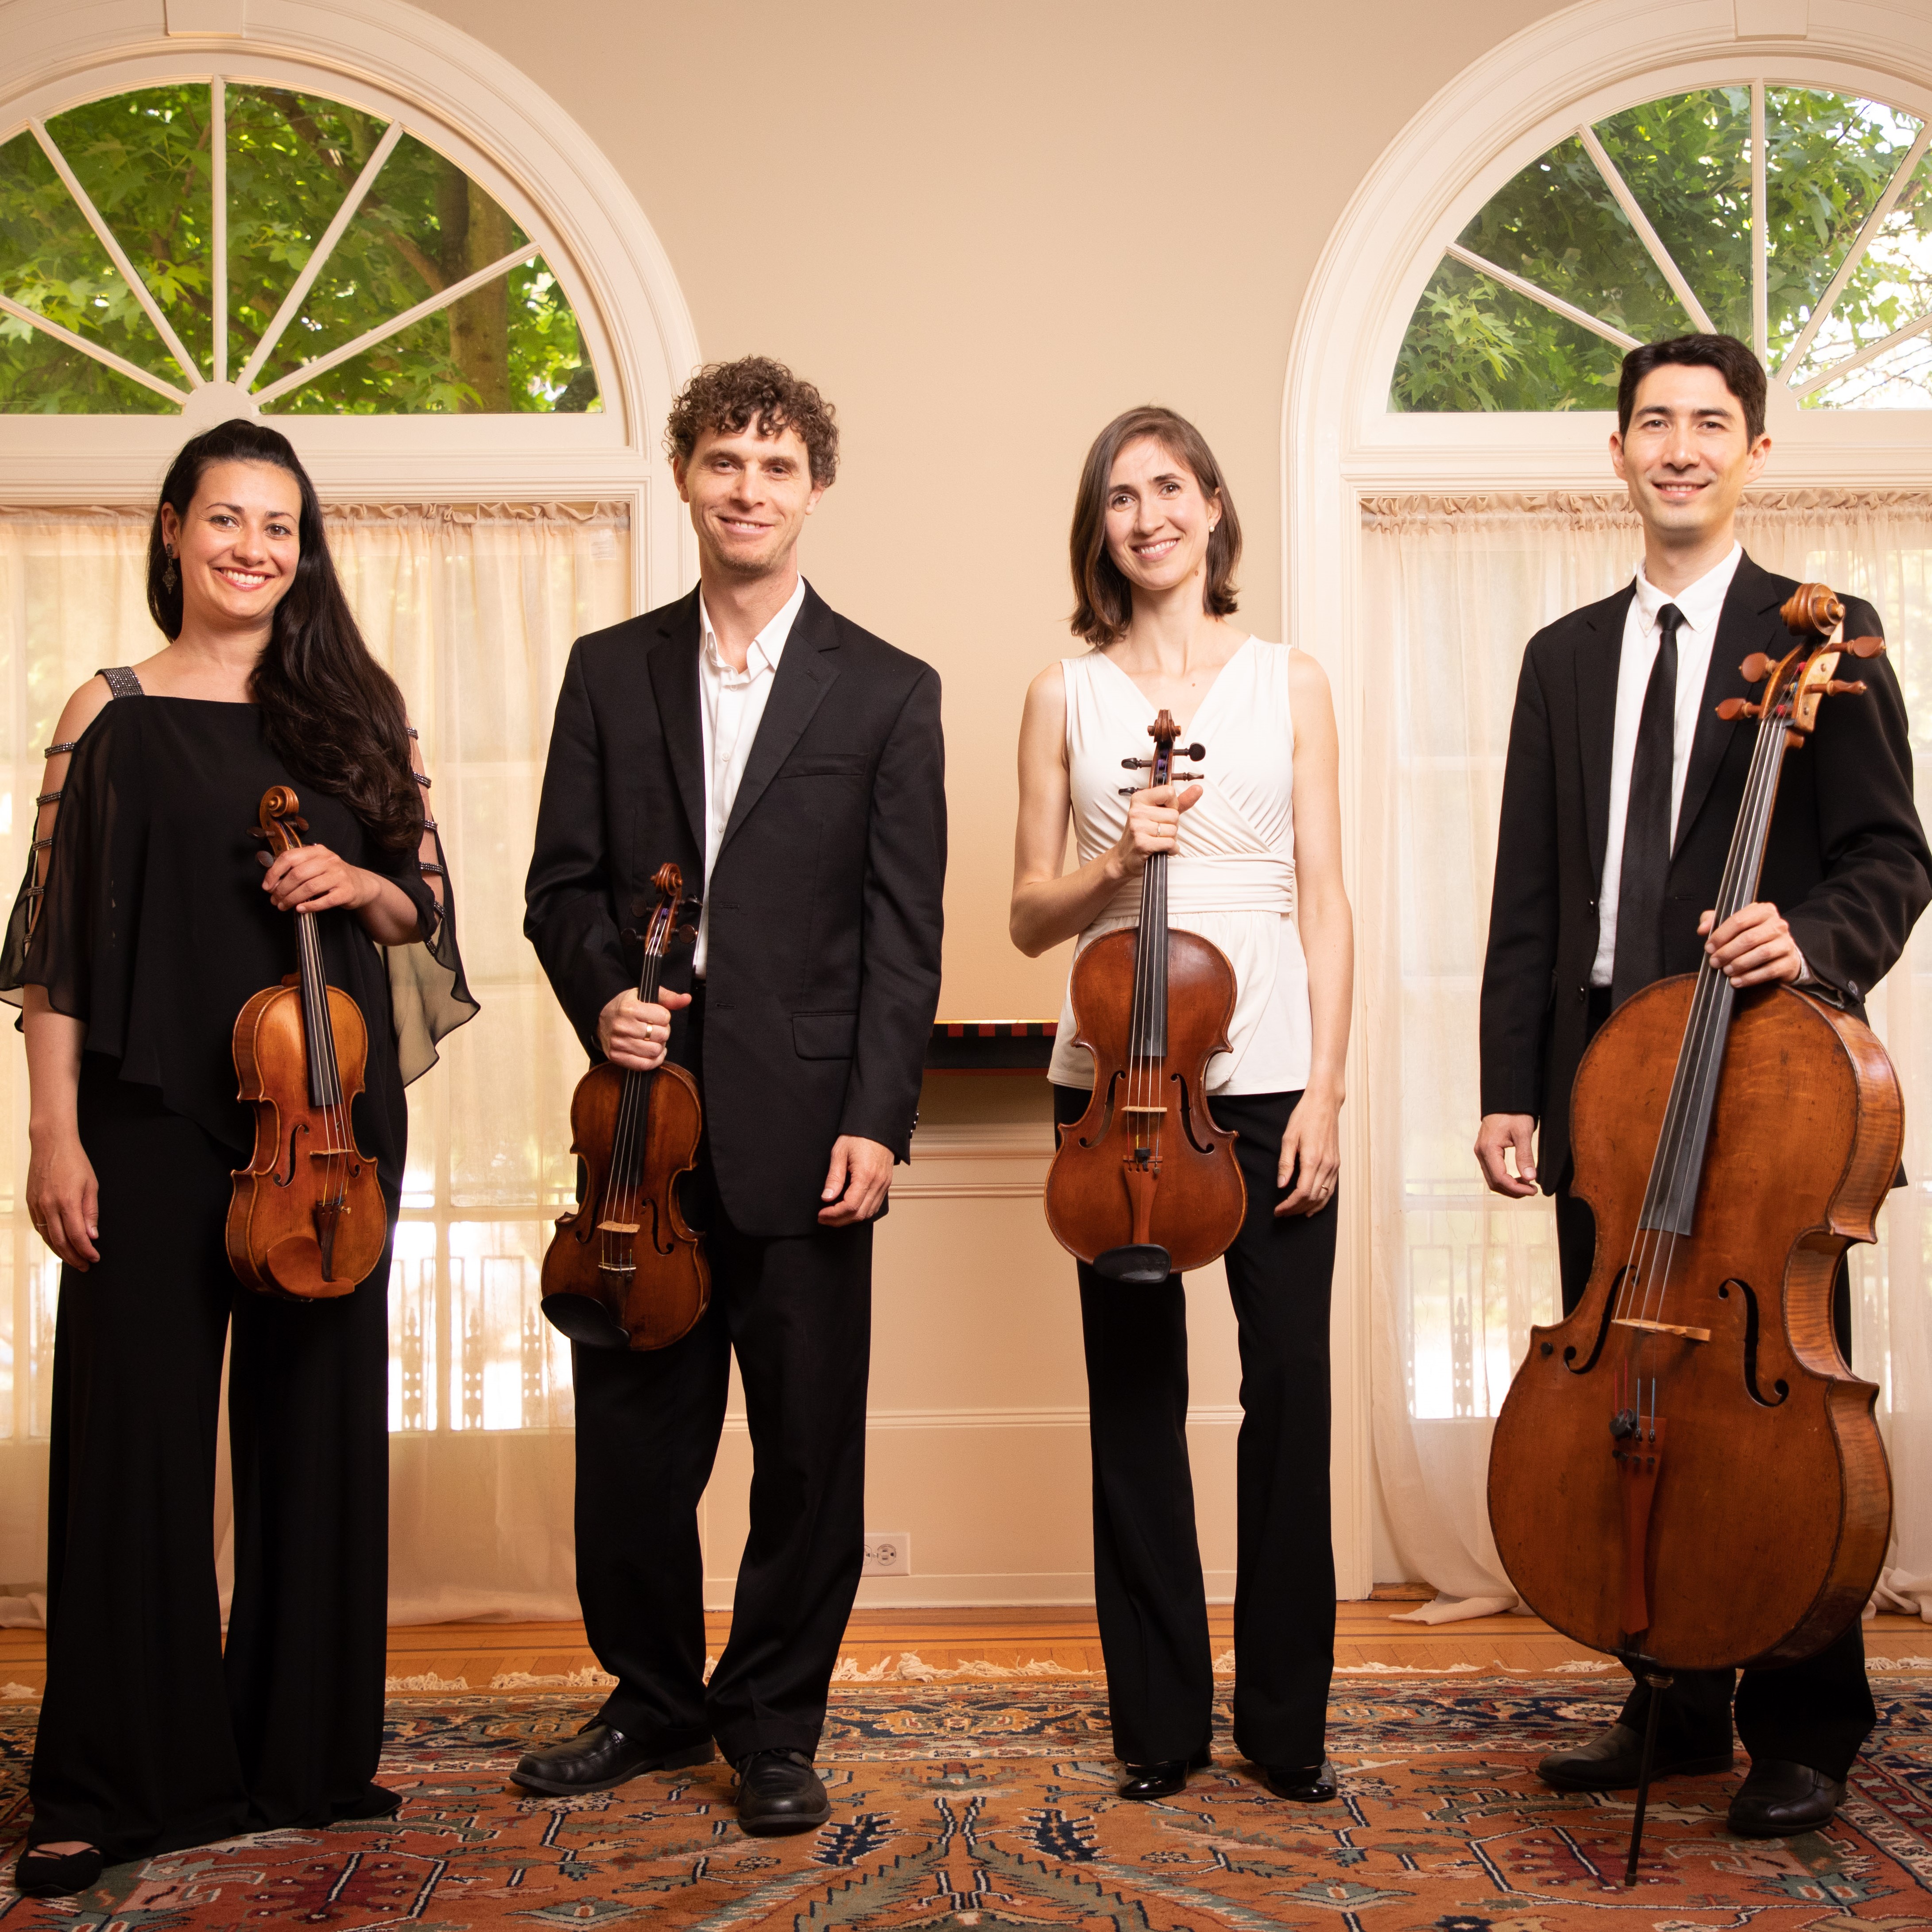 An Afternoon of Classical Music with the Chamber Music Society of San Francisco